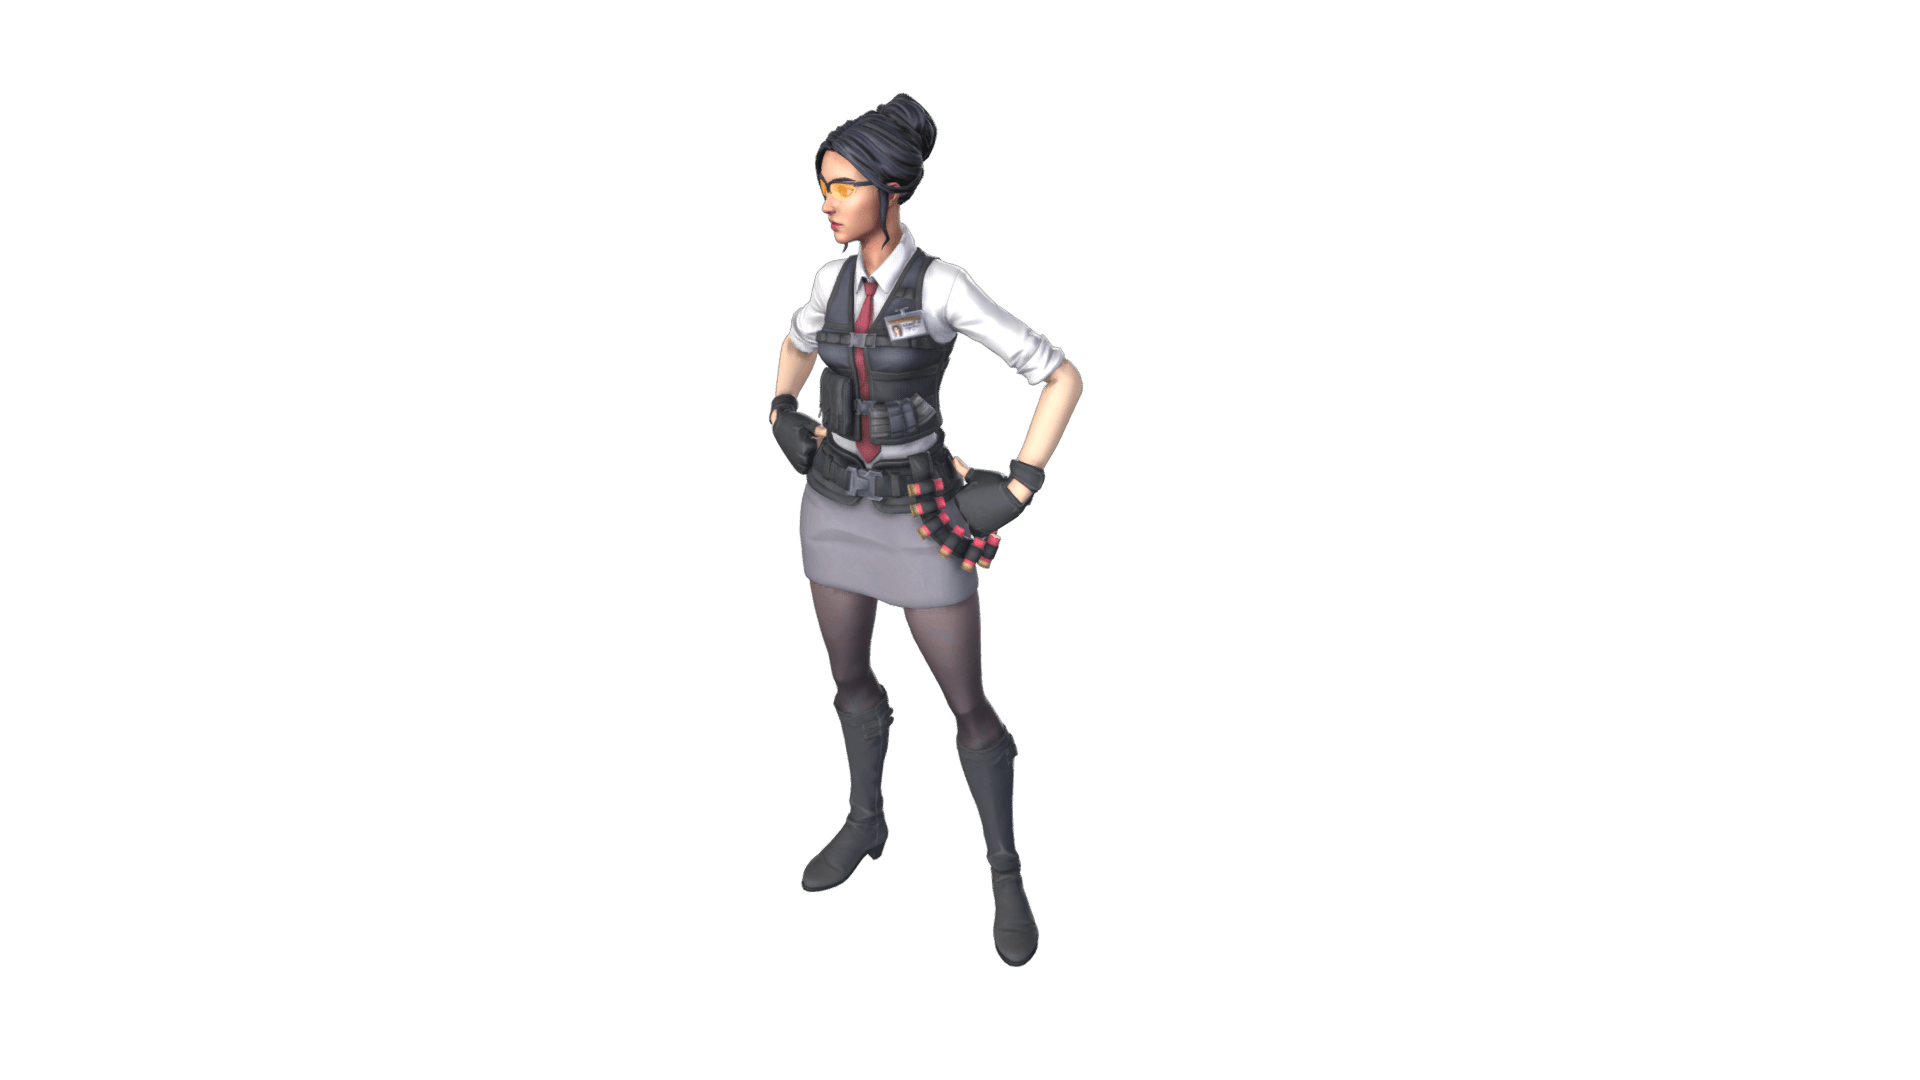 Fortnite Rook Outfits Skins